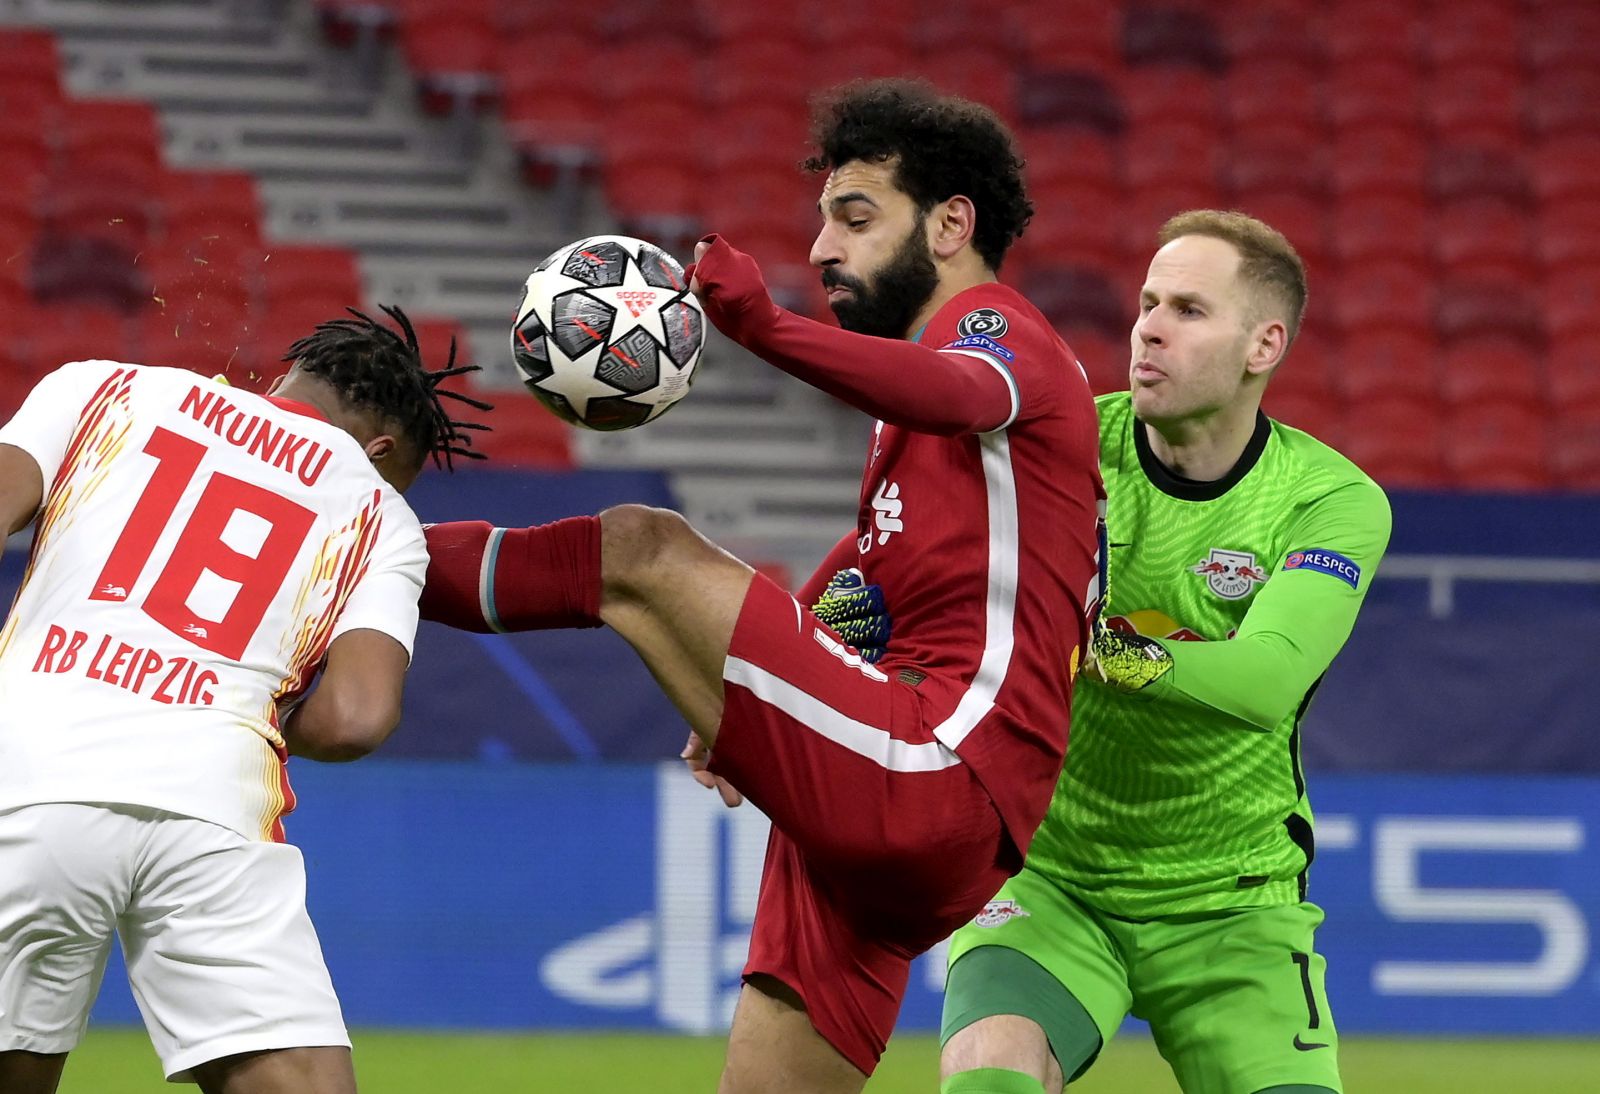 epa09066459 Christopher Nkunku (L) and goalkeeper Peter Gulacsi (R) of RB Leipzig fight for the ball with Mohamed Salah (C) of Liverpool during the UEFA Champions League round of 16, second leg, soccer match between Liverpool FC and RB Leipzig at Puskas Ferenc Arena in Budapest, Hungary, 10 March 2021  EPA/Szilard Koszticsak HUNGARY OUT